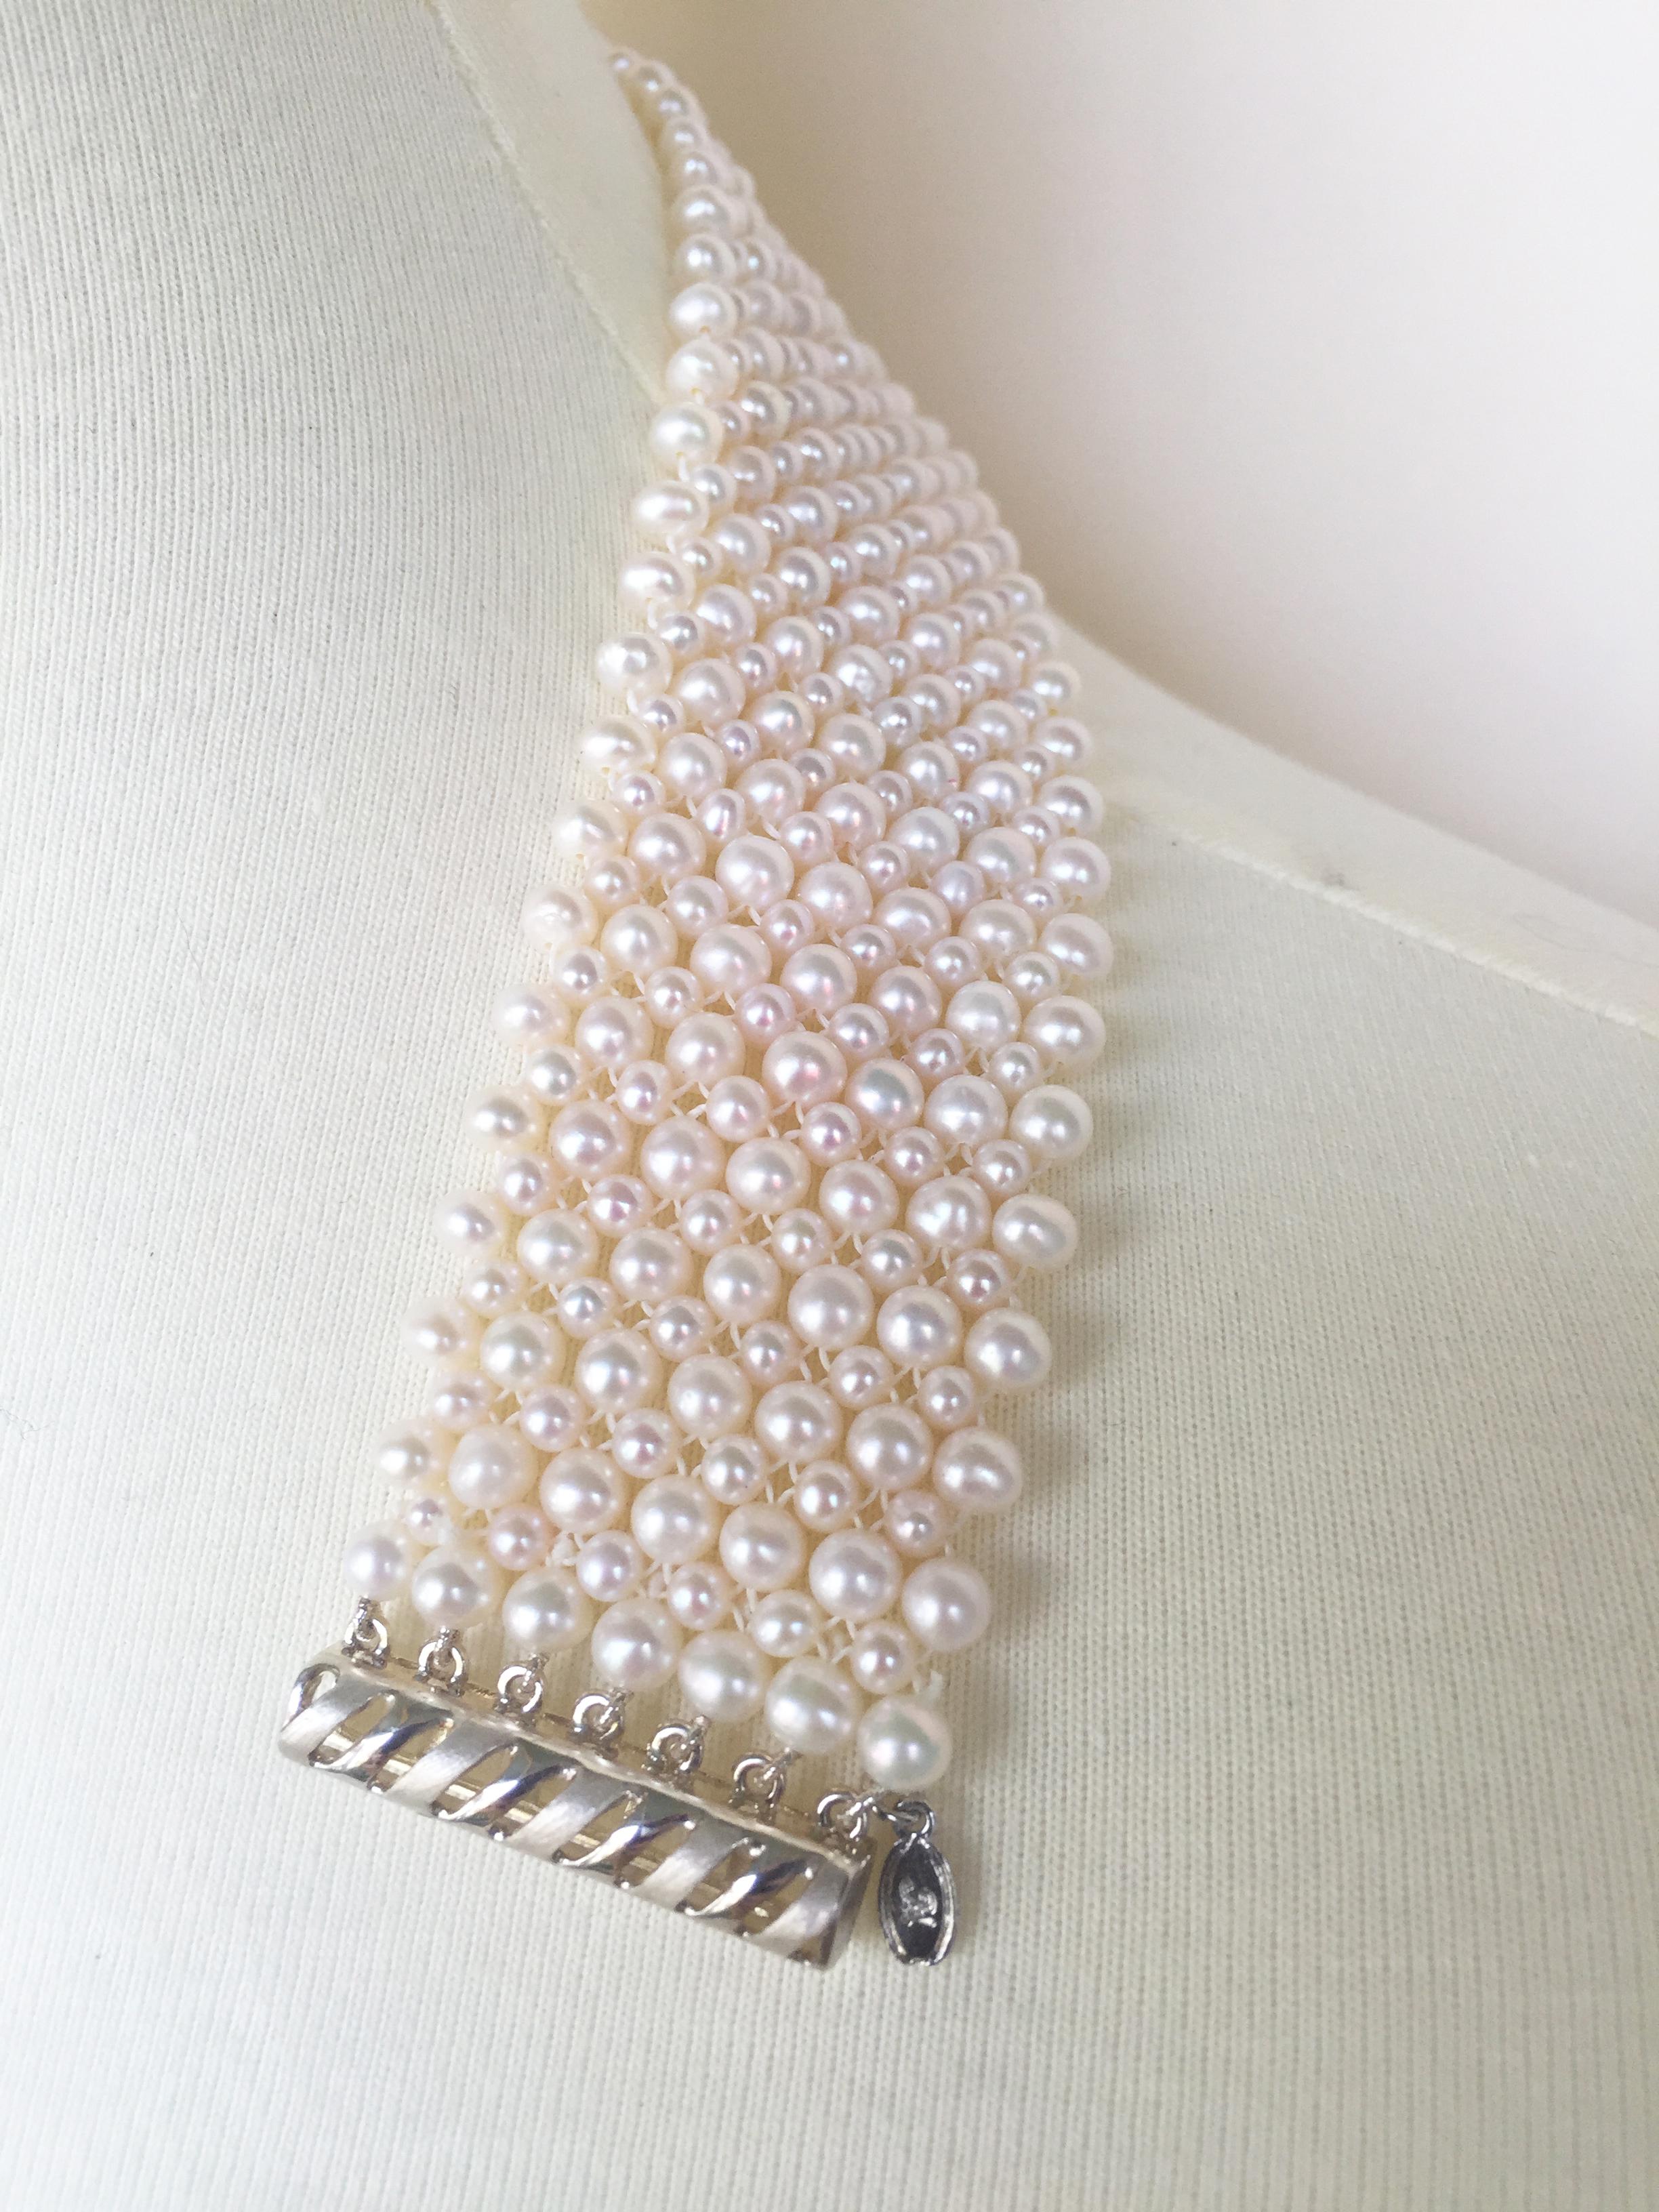 Woven Round White Pearl Wide Choker with Sterling Silver Sliding Clasp 2